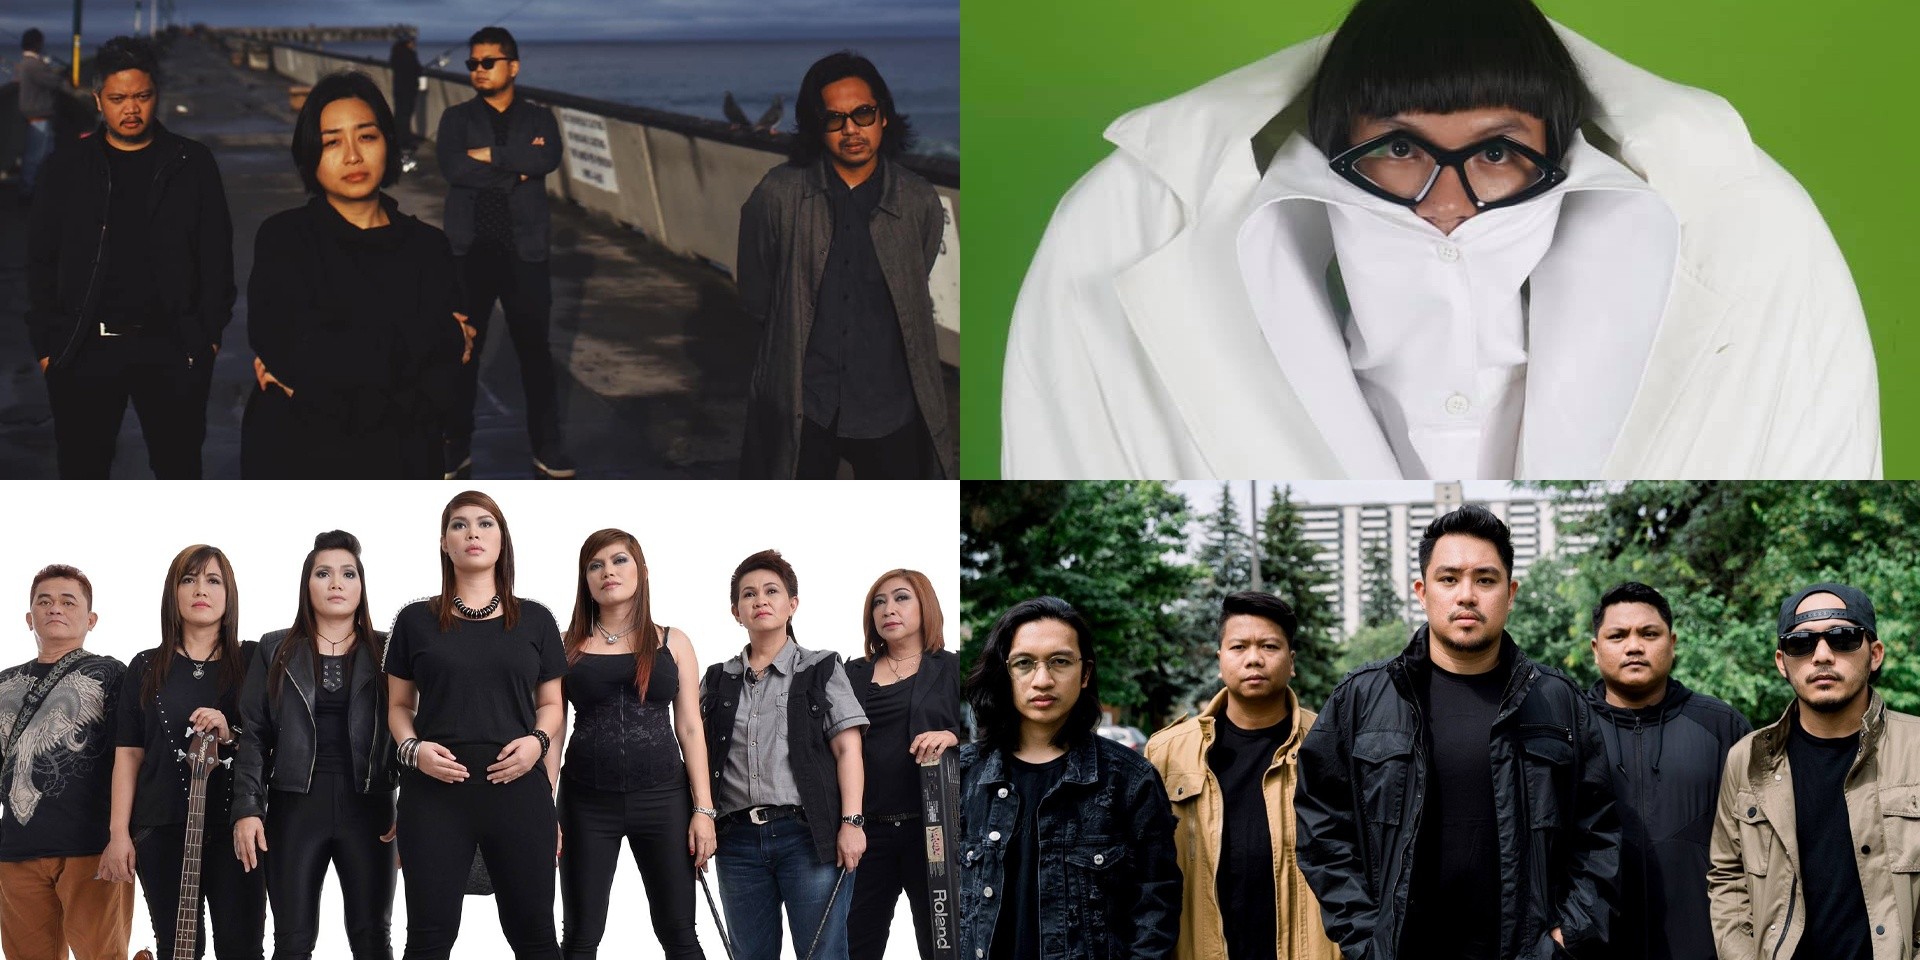 Aegis, UDD, December Avenue, Unique, and more to perform at Santelmo Halloween Music Party